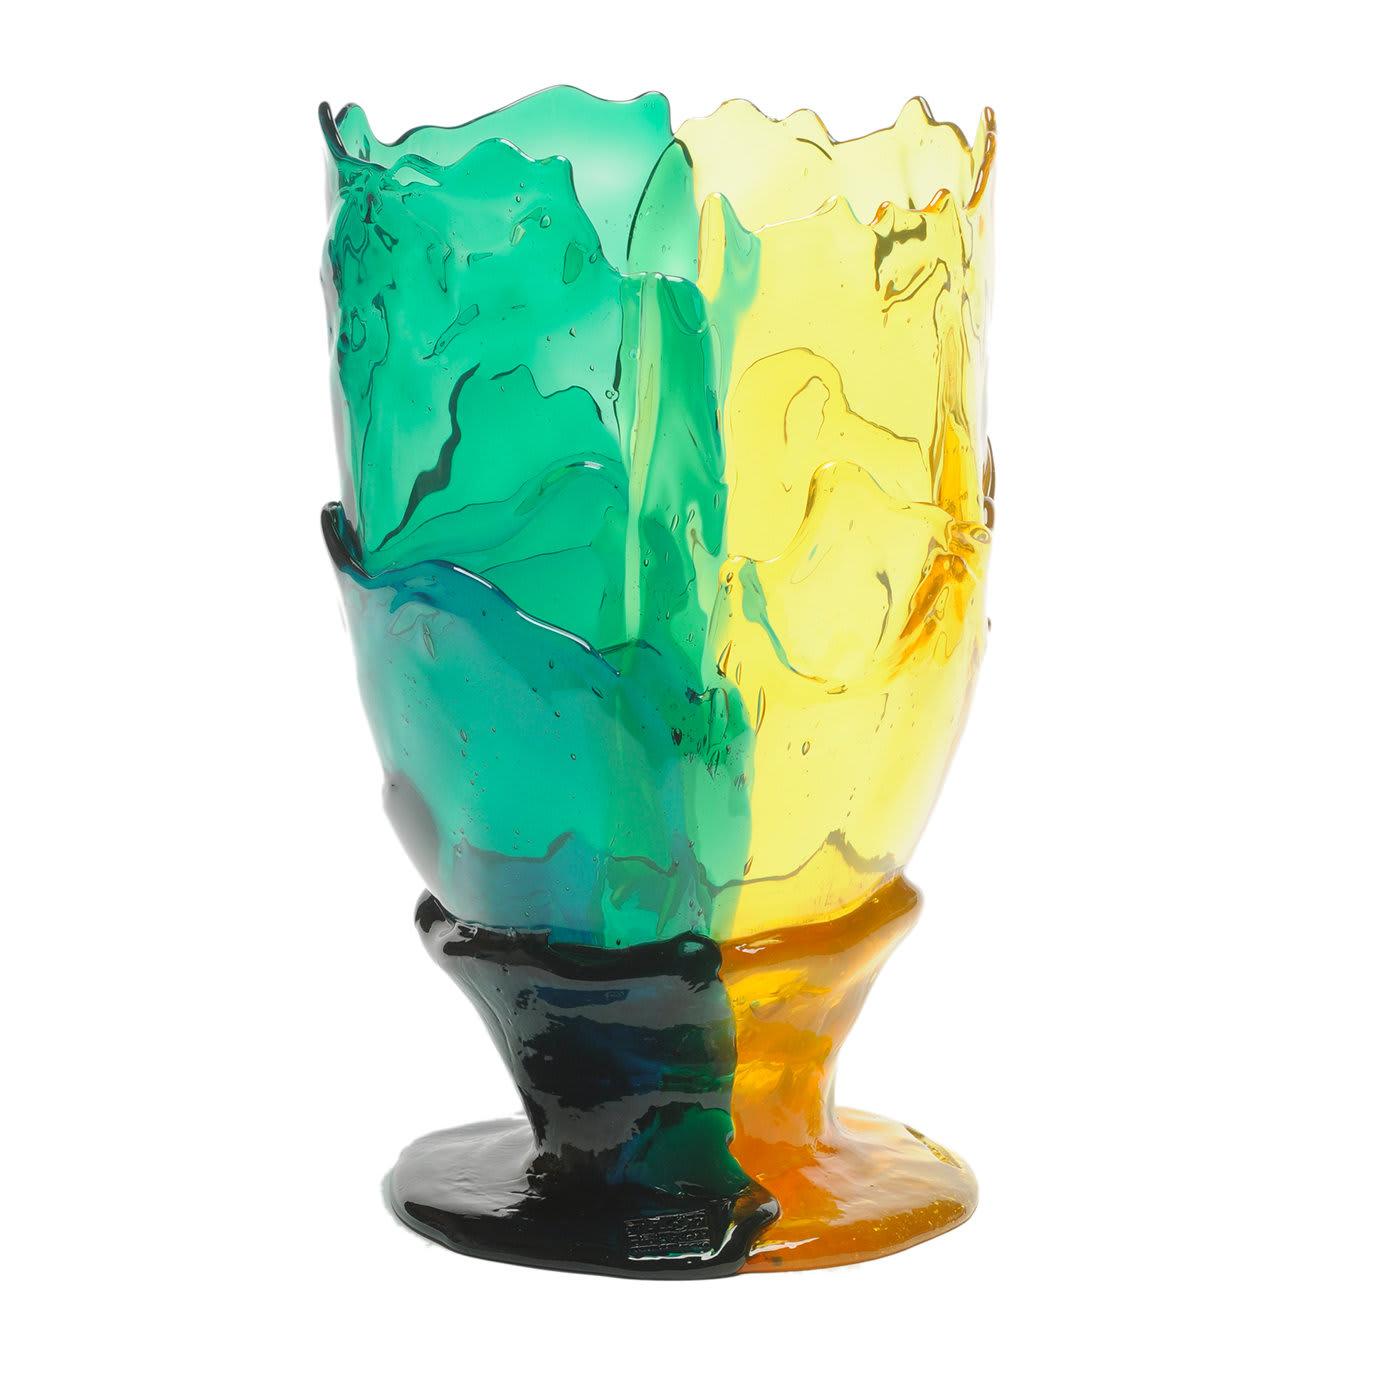 The ultimate statement piece in any home, both on its own or with flowers, this vase features dripping layers of vibrant green- and yellow-colored resin in a goblet shape. The soft resin is sculpted into layers to create an evocative visual effect